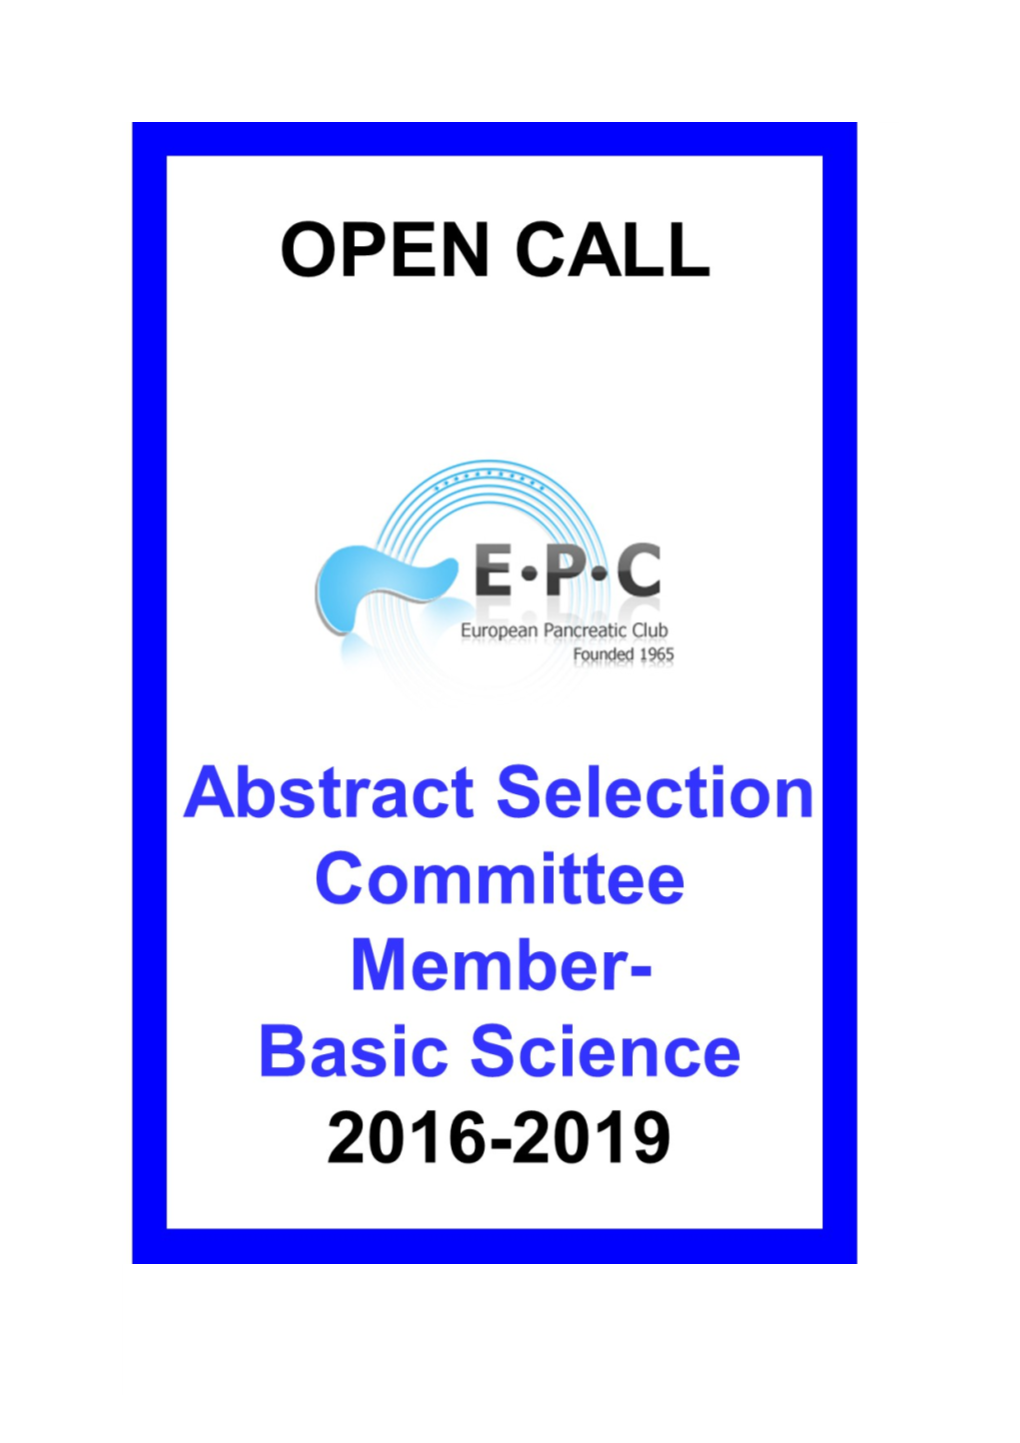 For Abstract Selection Committee Members (Representing Basic Science) at the European